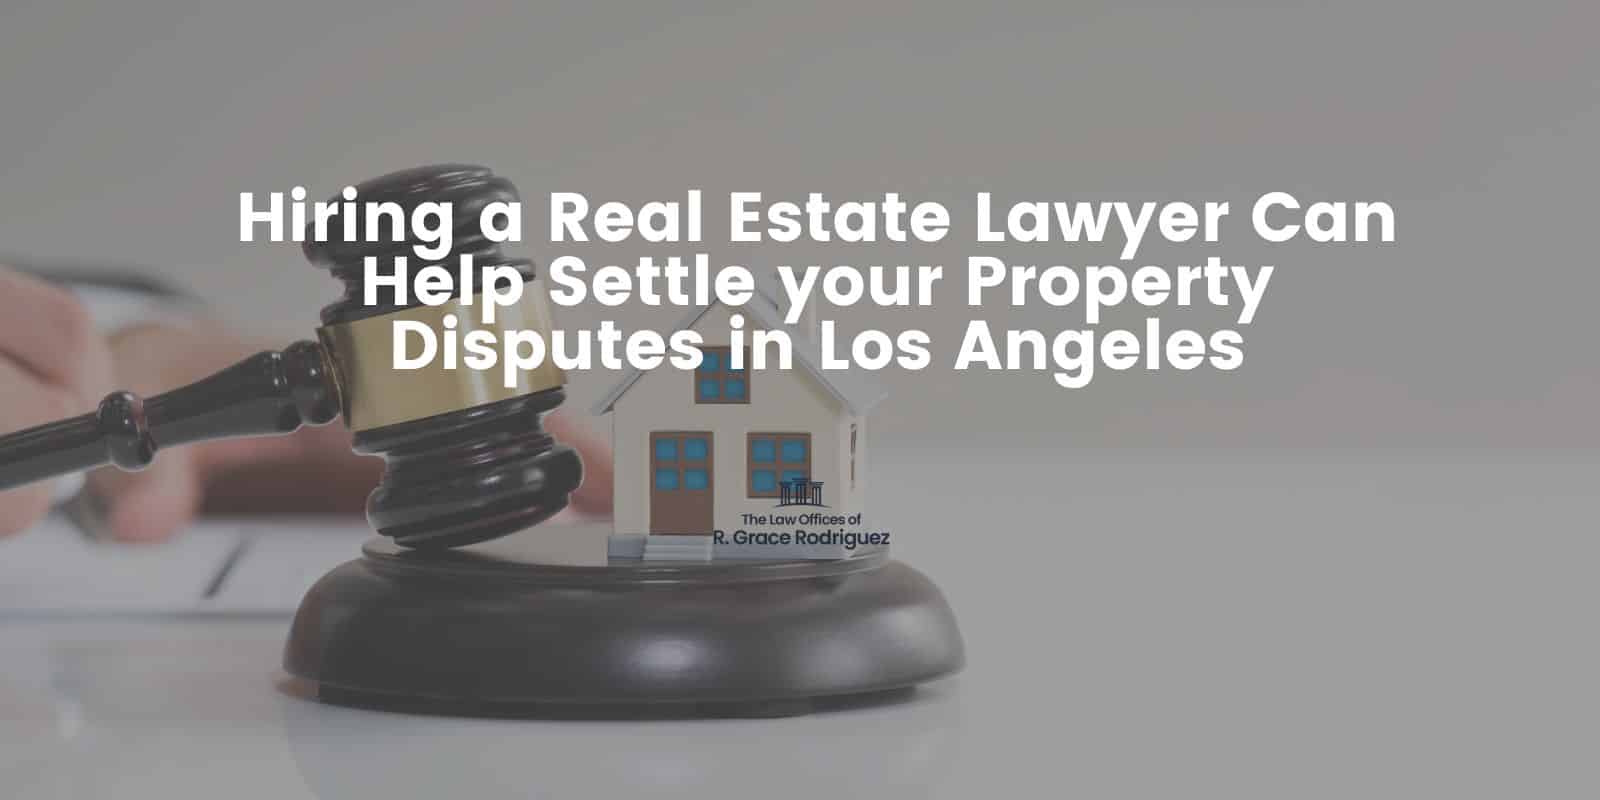 Hiring A Real Estate Lawyer Can Help Settle Your Property Disputes In Los Angeles The Law